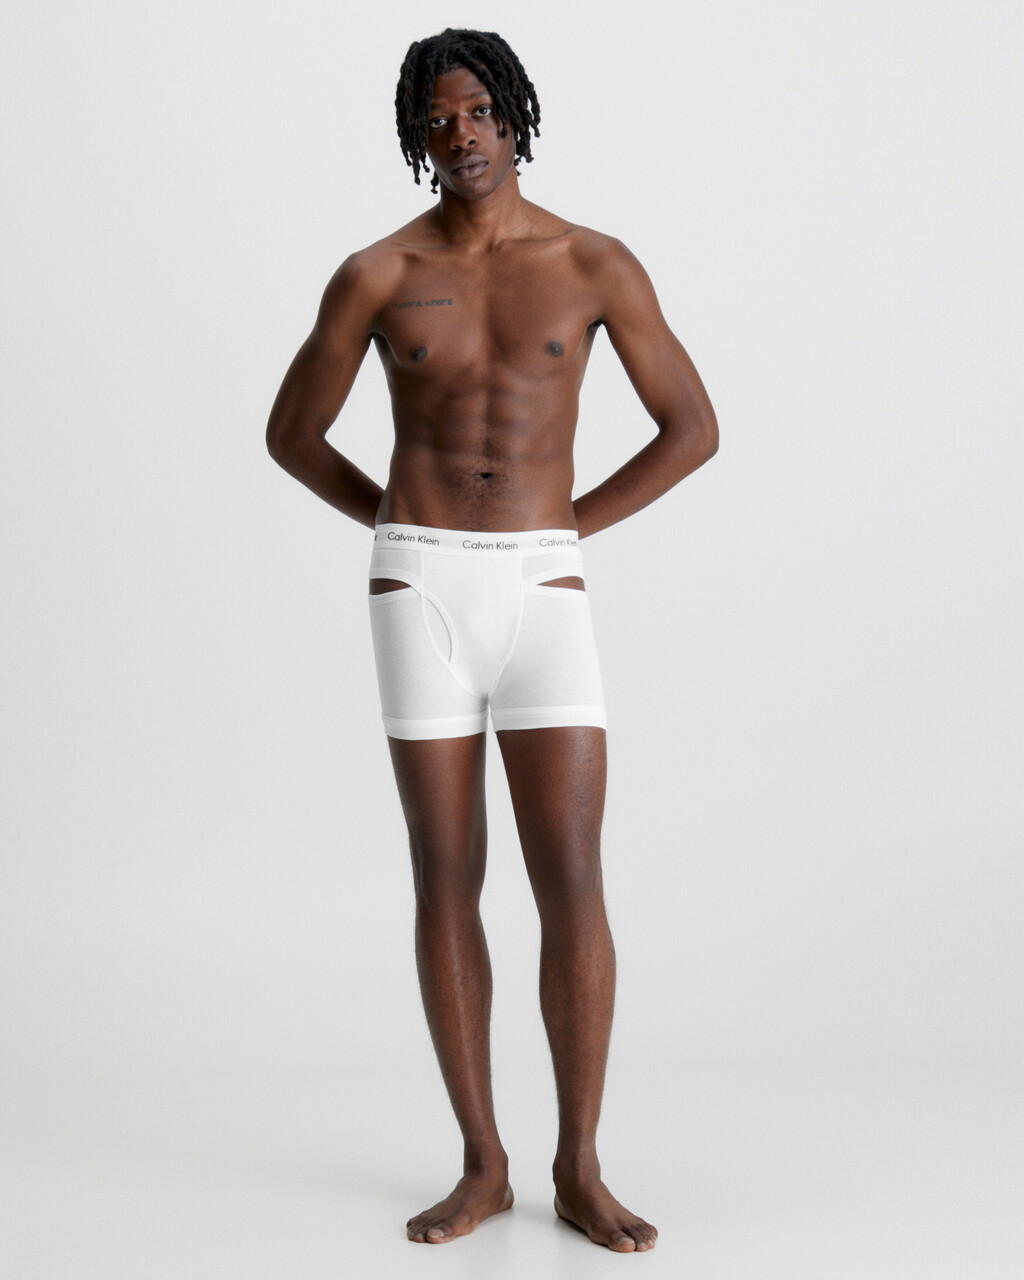 Deconstructed Cotton Stretch Trunks, White, hi-res